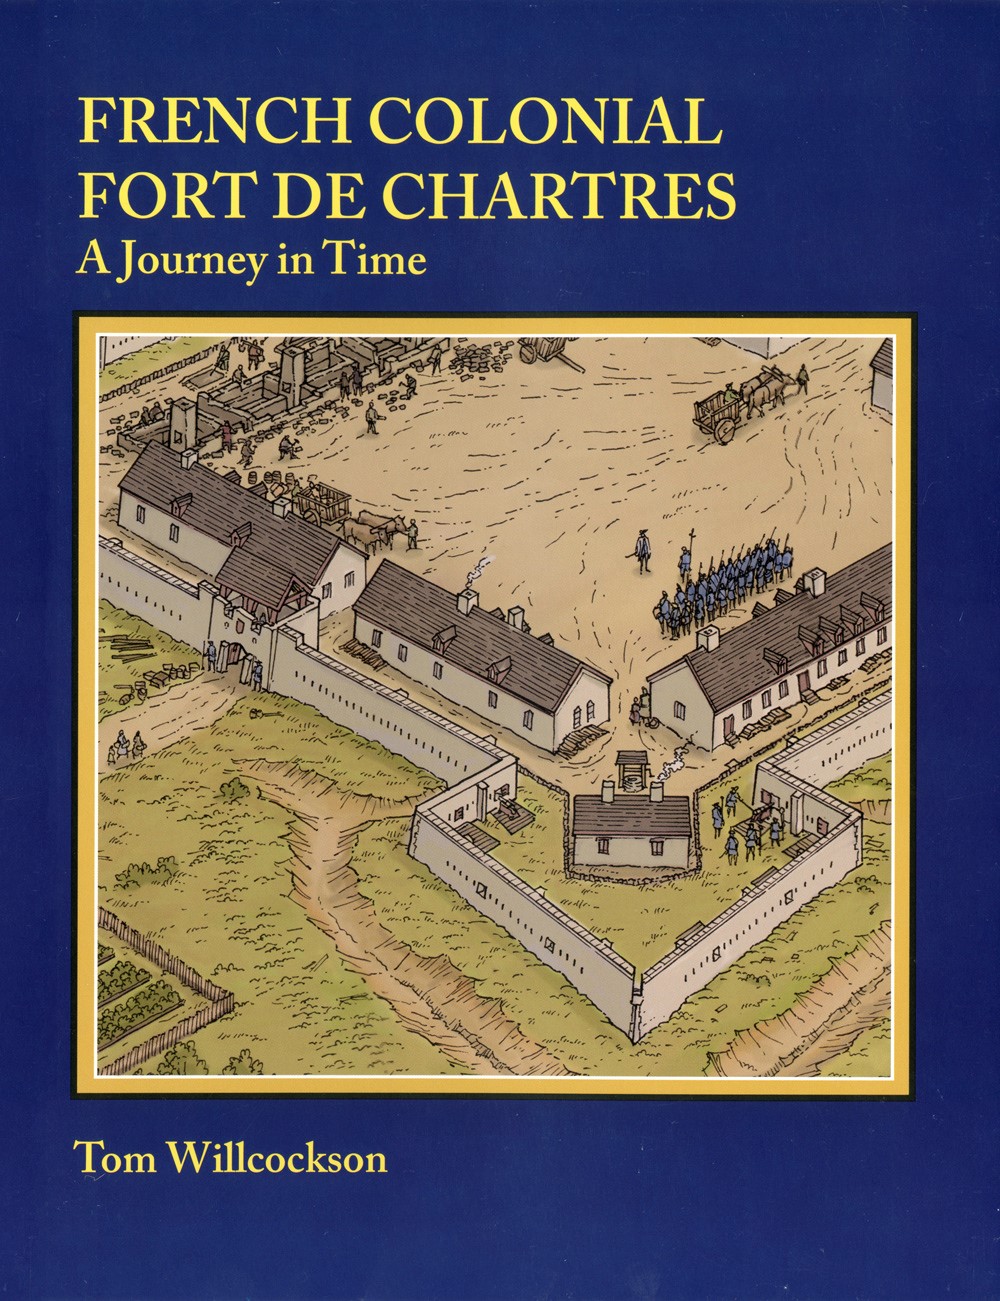 Cover of French Colonial Fort de Chartres: A Journey in Time by Tom Willcockson.